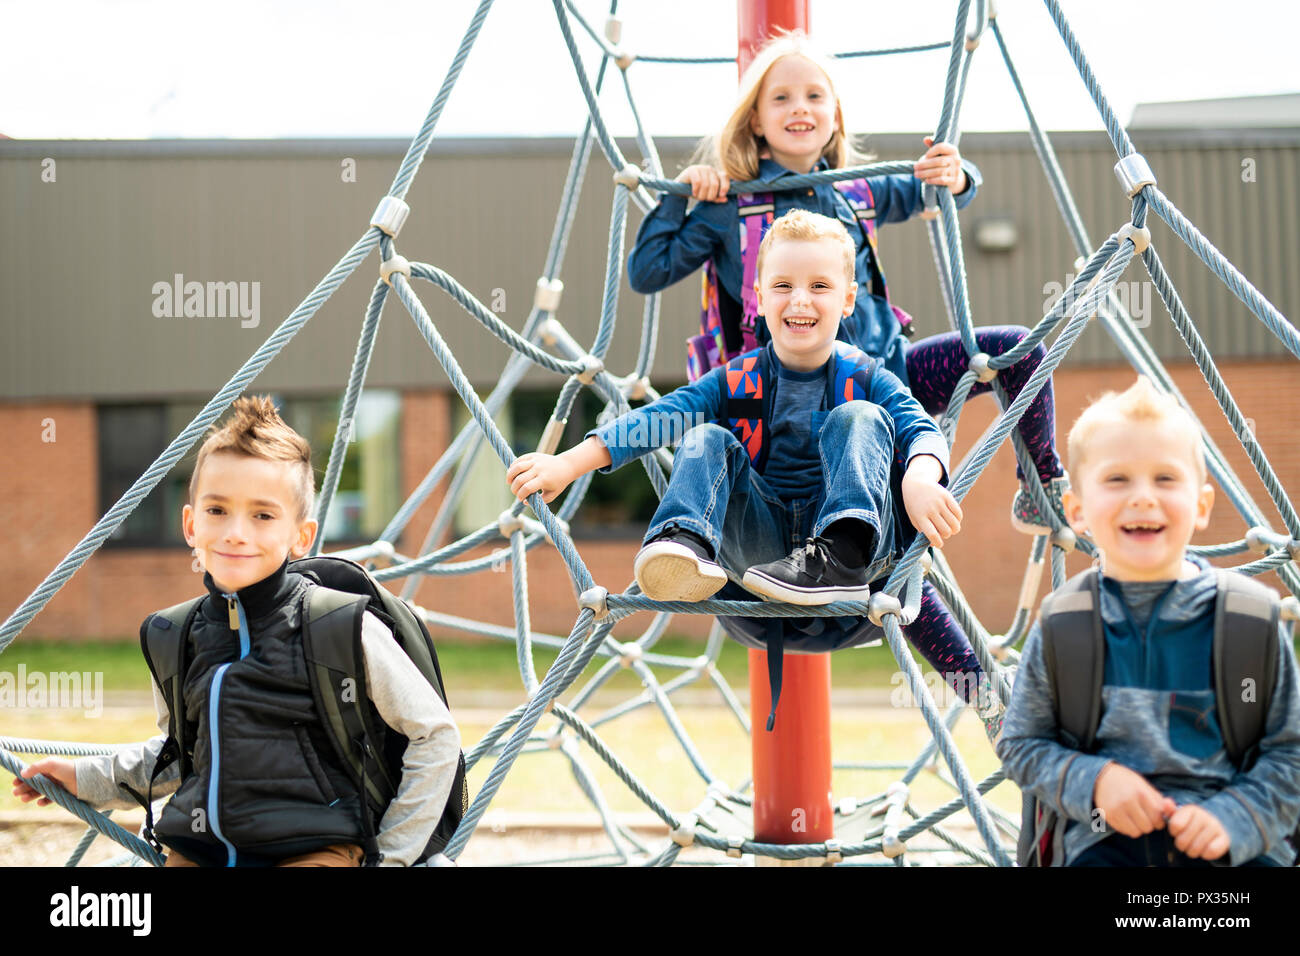 A happy excited kids having fun together on playground Stock Photo